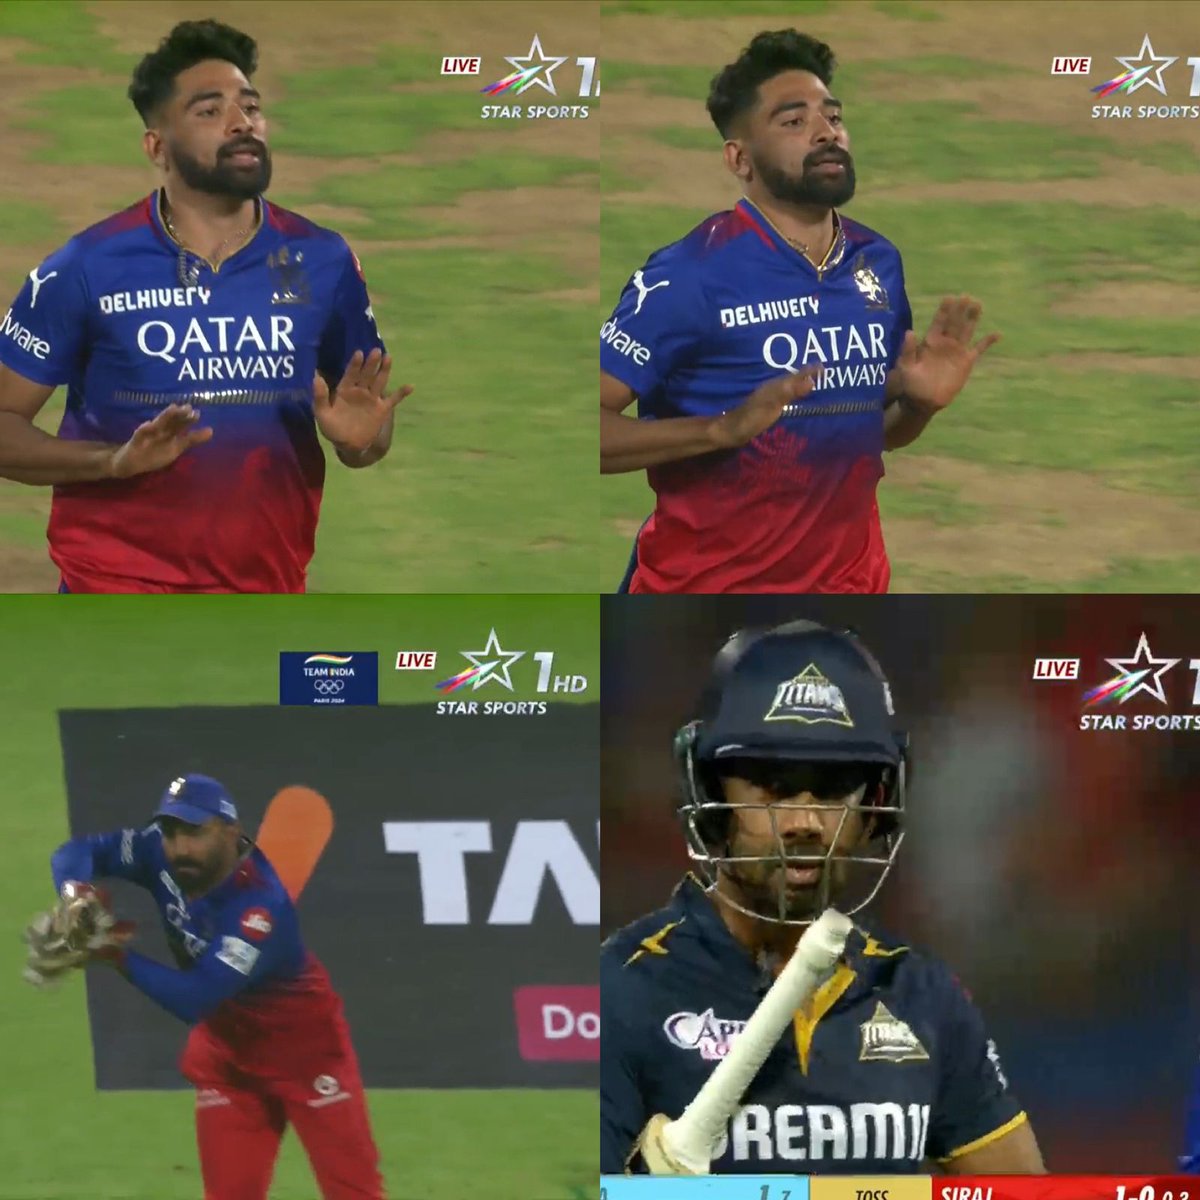 Siiiiuuuuraj strikes! 👏🏻

A wicket in his very 1st over & Mohammed Siraj gets going right from the word go in this #RevengeWeekOnStar fixture! 💪🏻

Will he come good with the new ball in T20 World Cup? 👍🏽 or 👎🏽

📺 | Bengaluru 🆚 Gujarat | LIVE NOW | #IPLOnStar